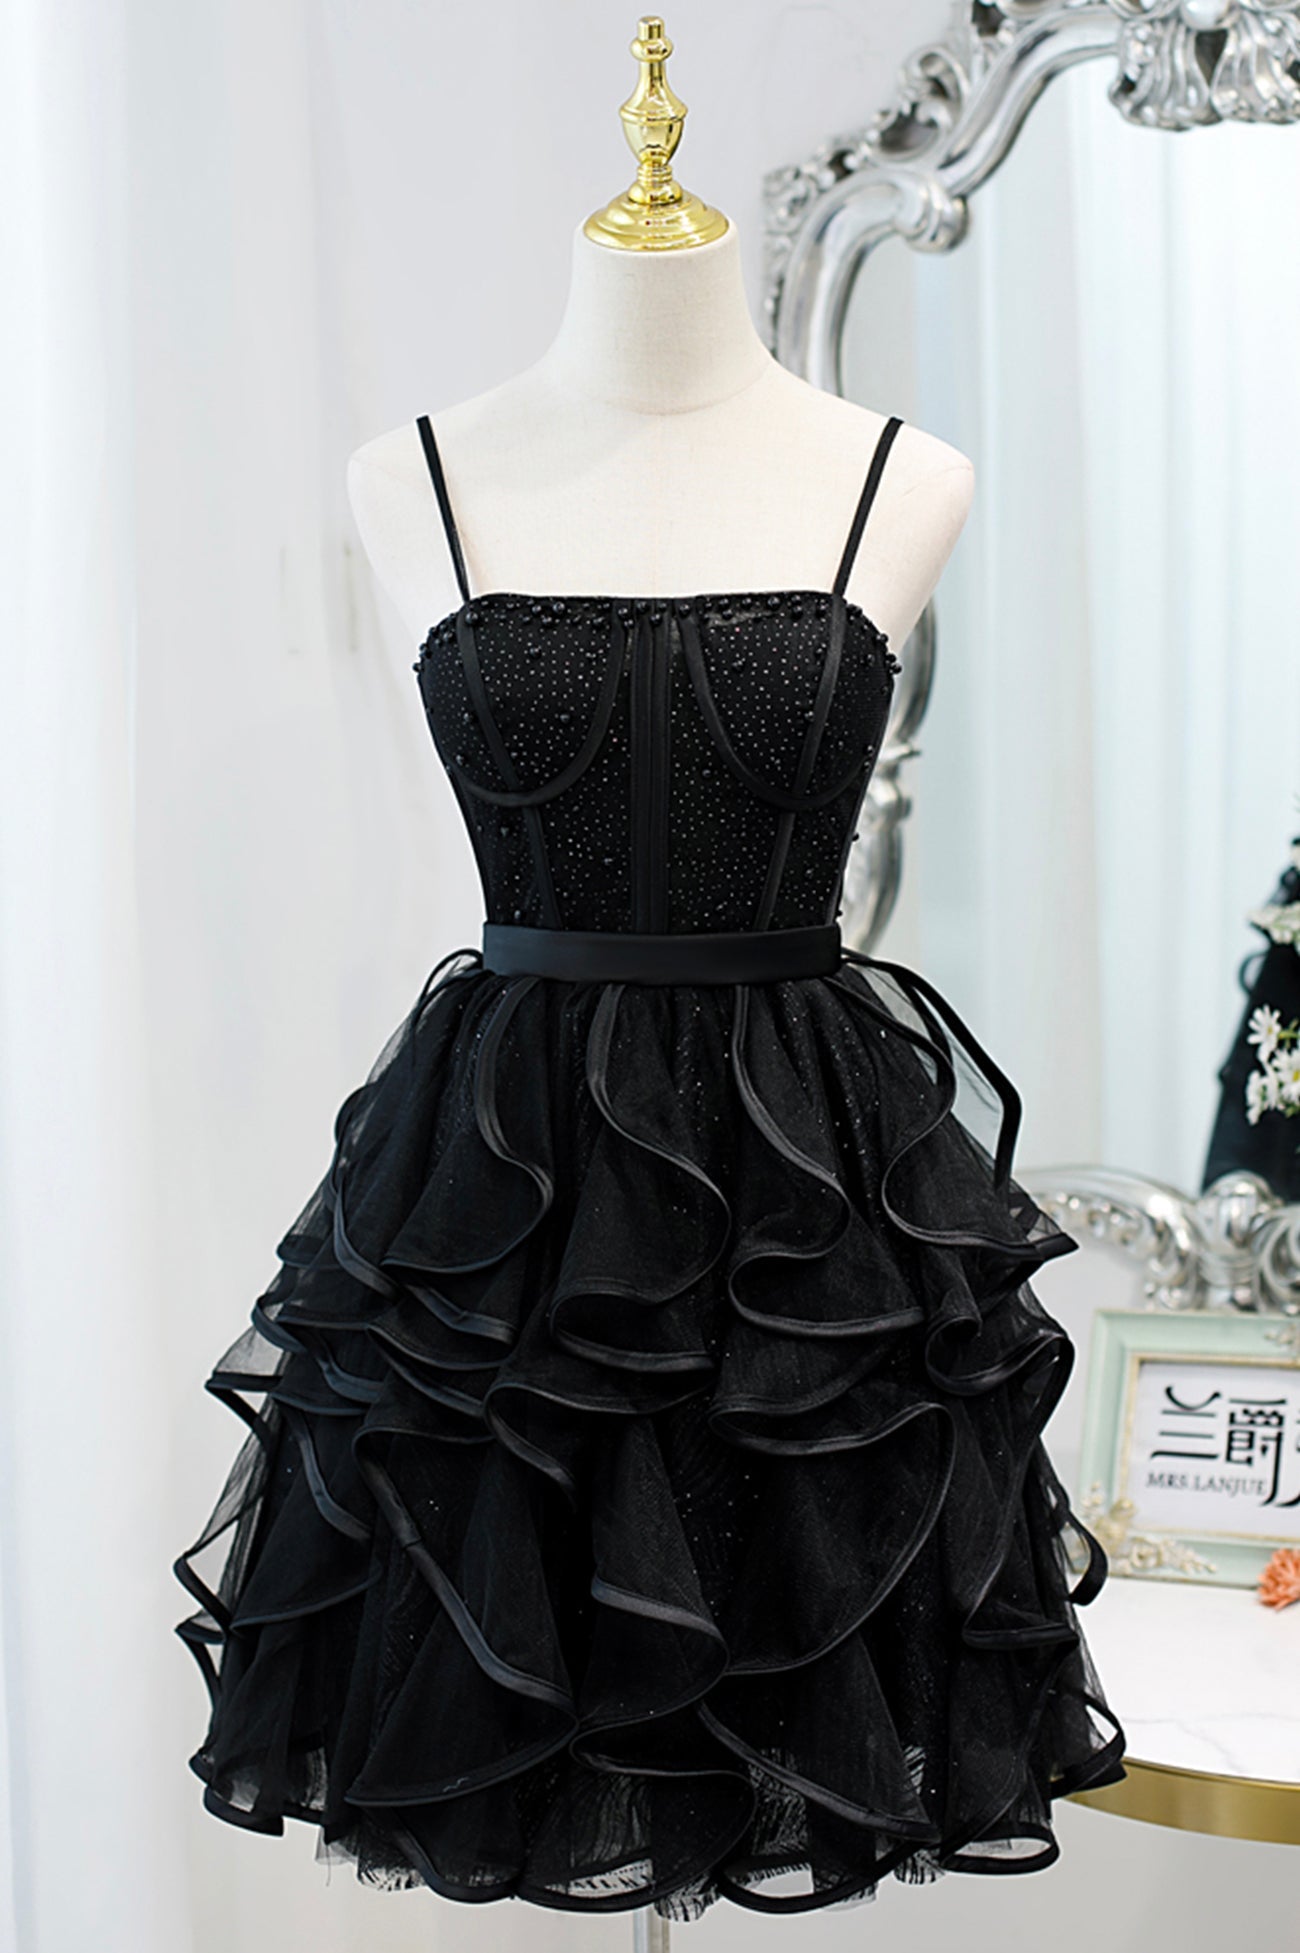 Bethany | Lovely Spaghetti Strap Tulle Short Prom Dress A-Line Homecoming Dress